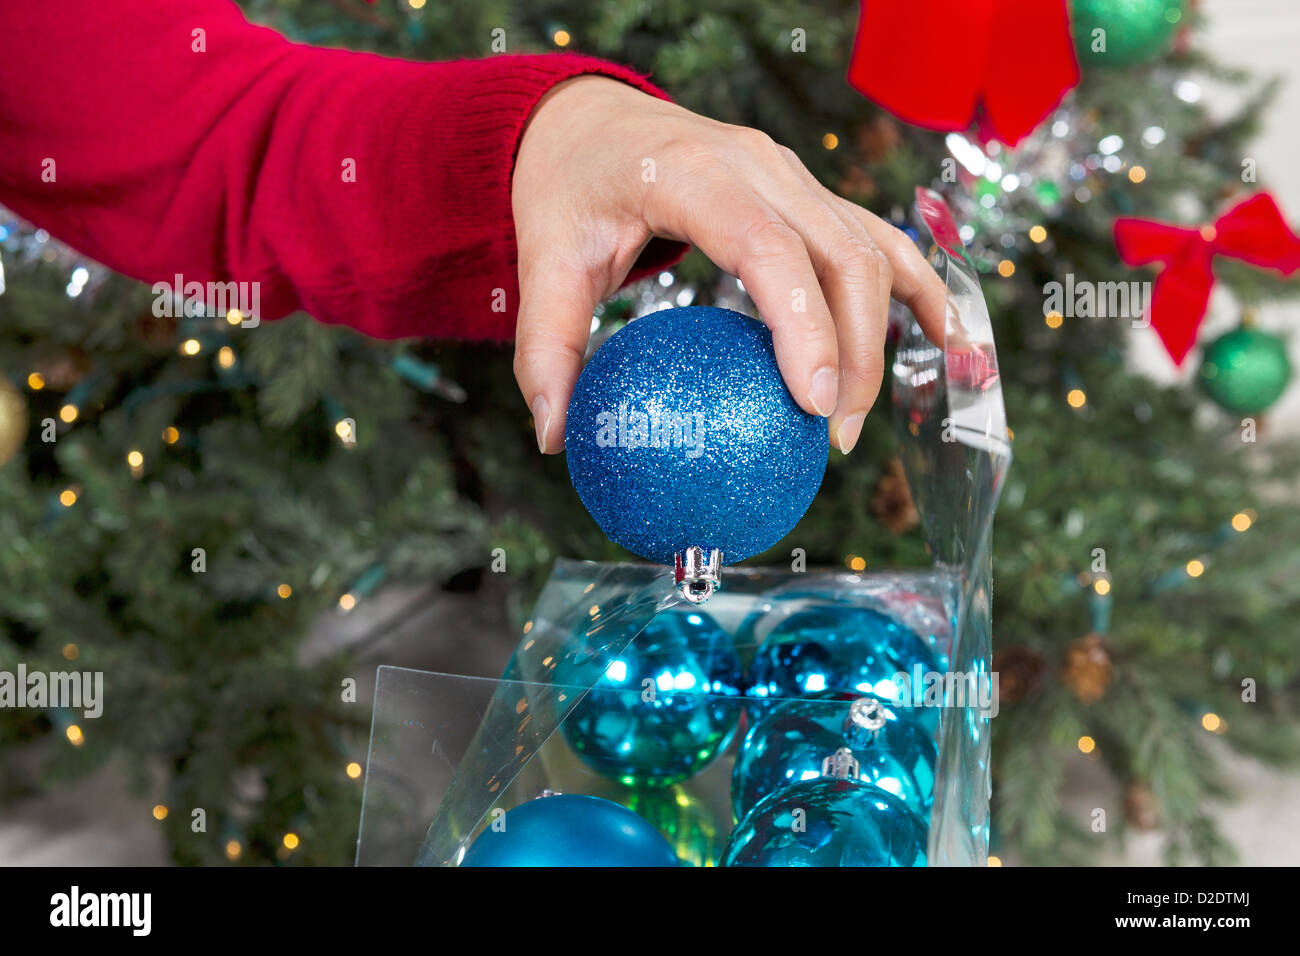 Female hand putting away holiday ornaments to end the season with Christmas tree in background Stock Photo